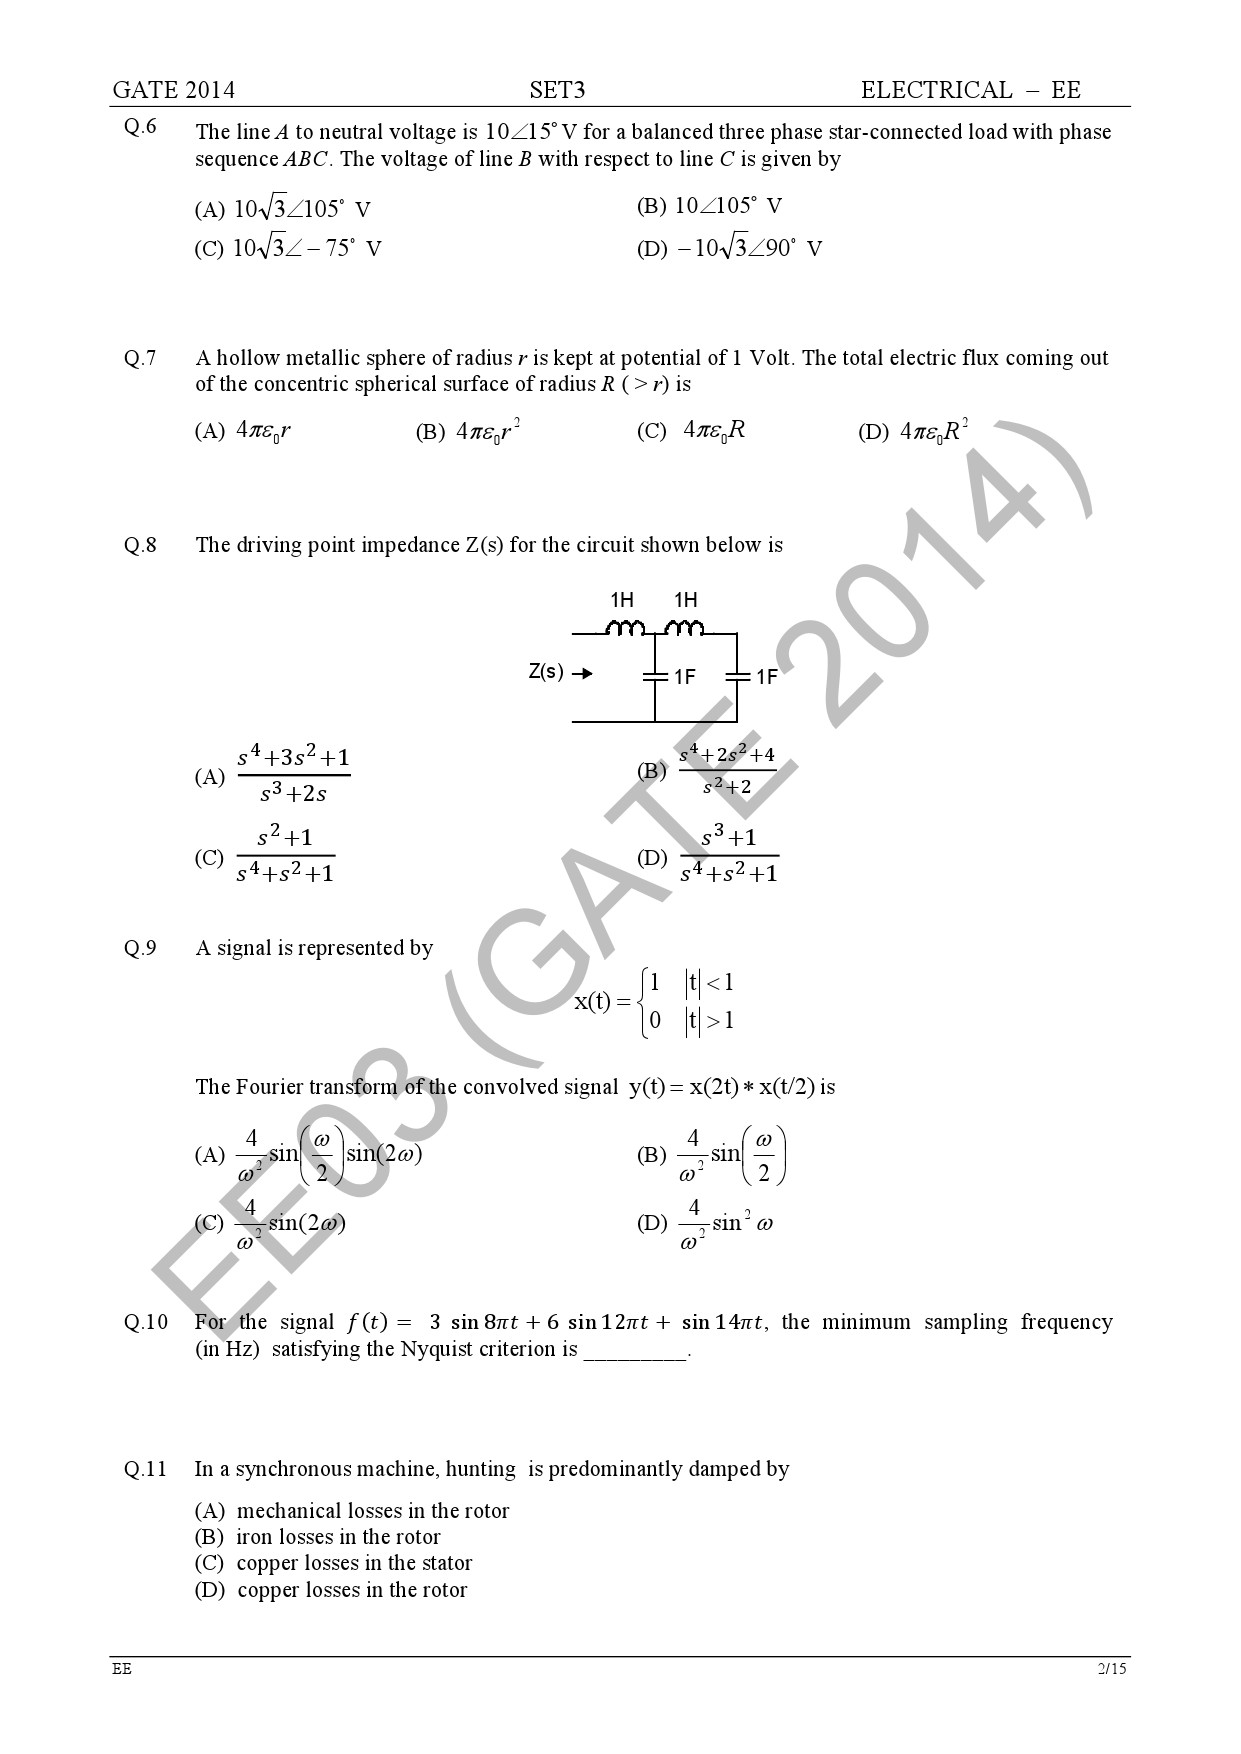 GATE Exam Question Paper 2014 Electrical Engineering Set 3 8